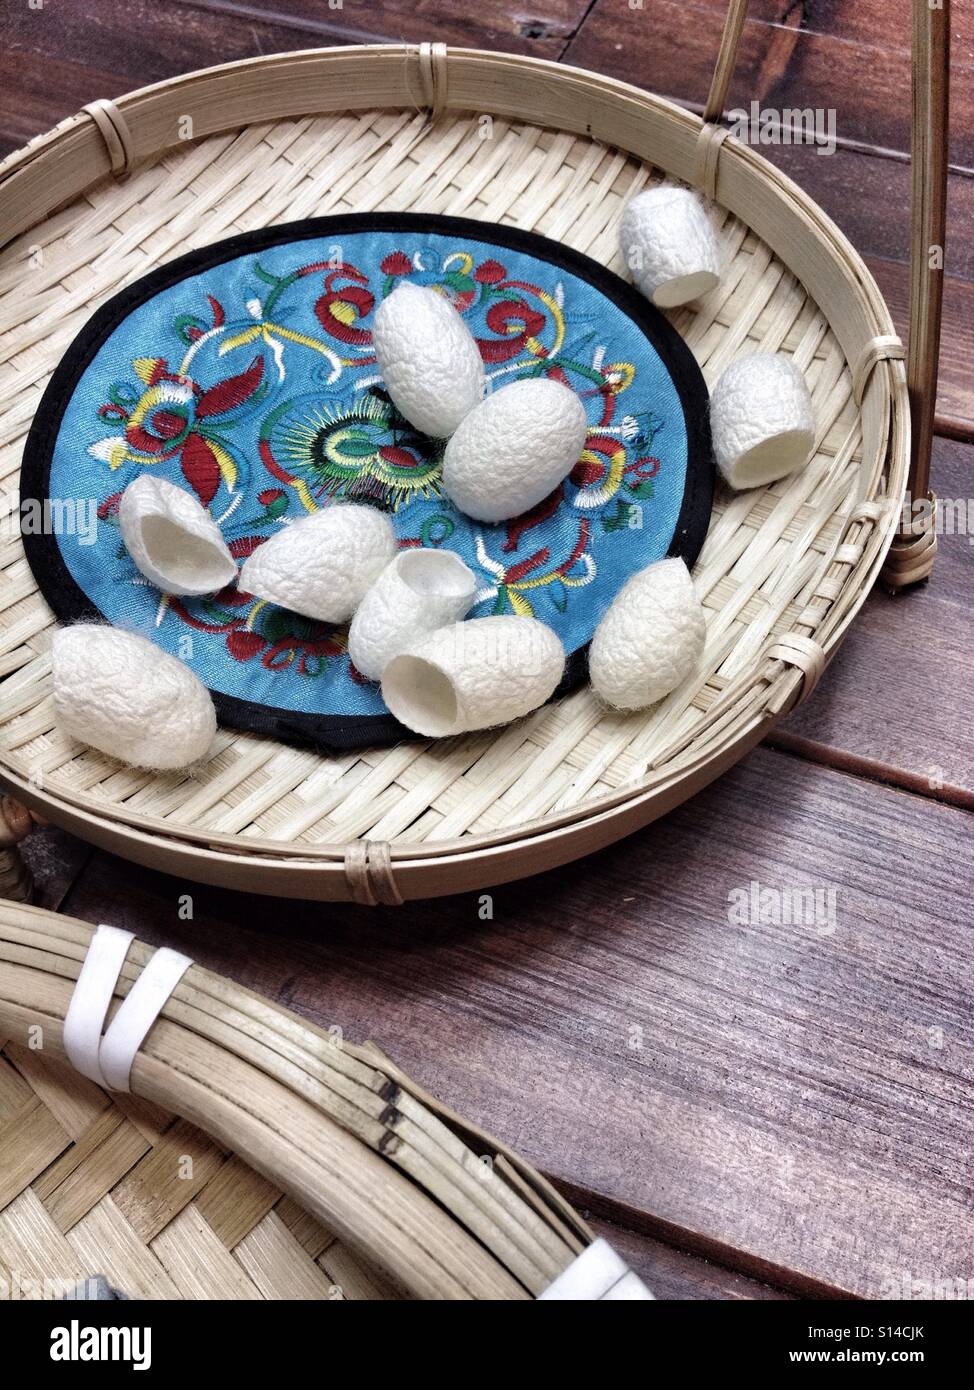 Silkworm Silk Cocoons On Bamboo Plate Waiting To Be Turned Into Silk Threading And Threads Stock Photo